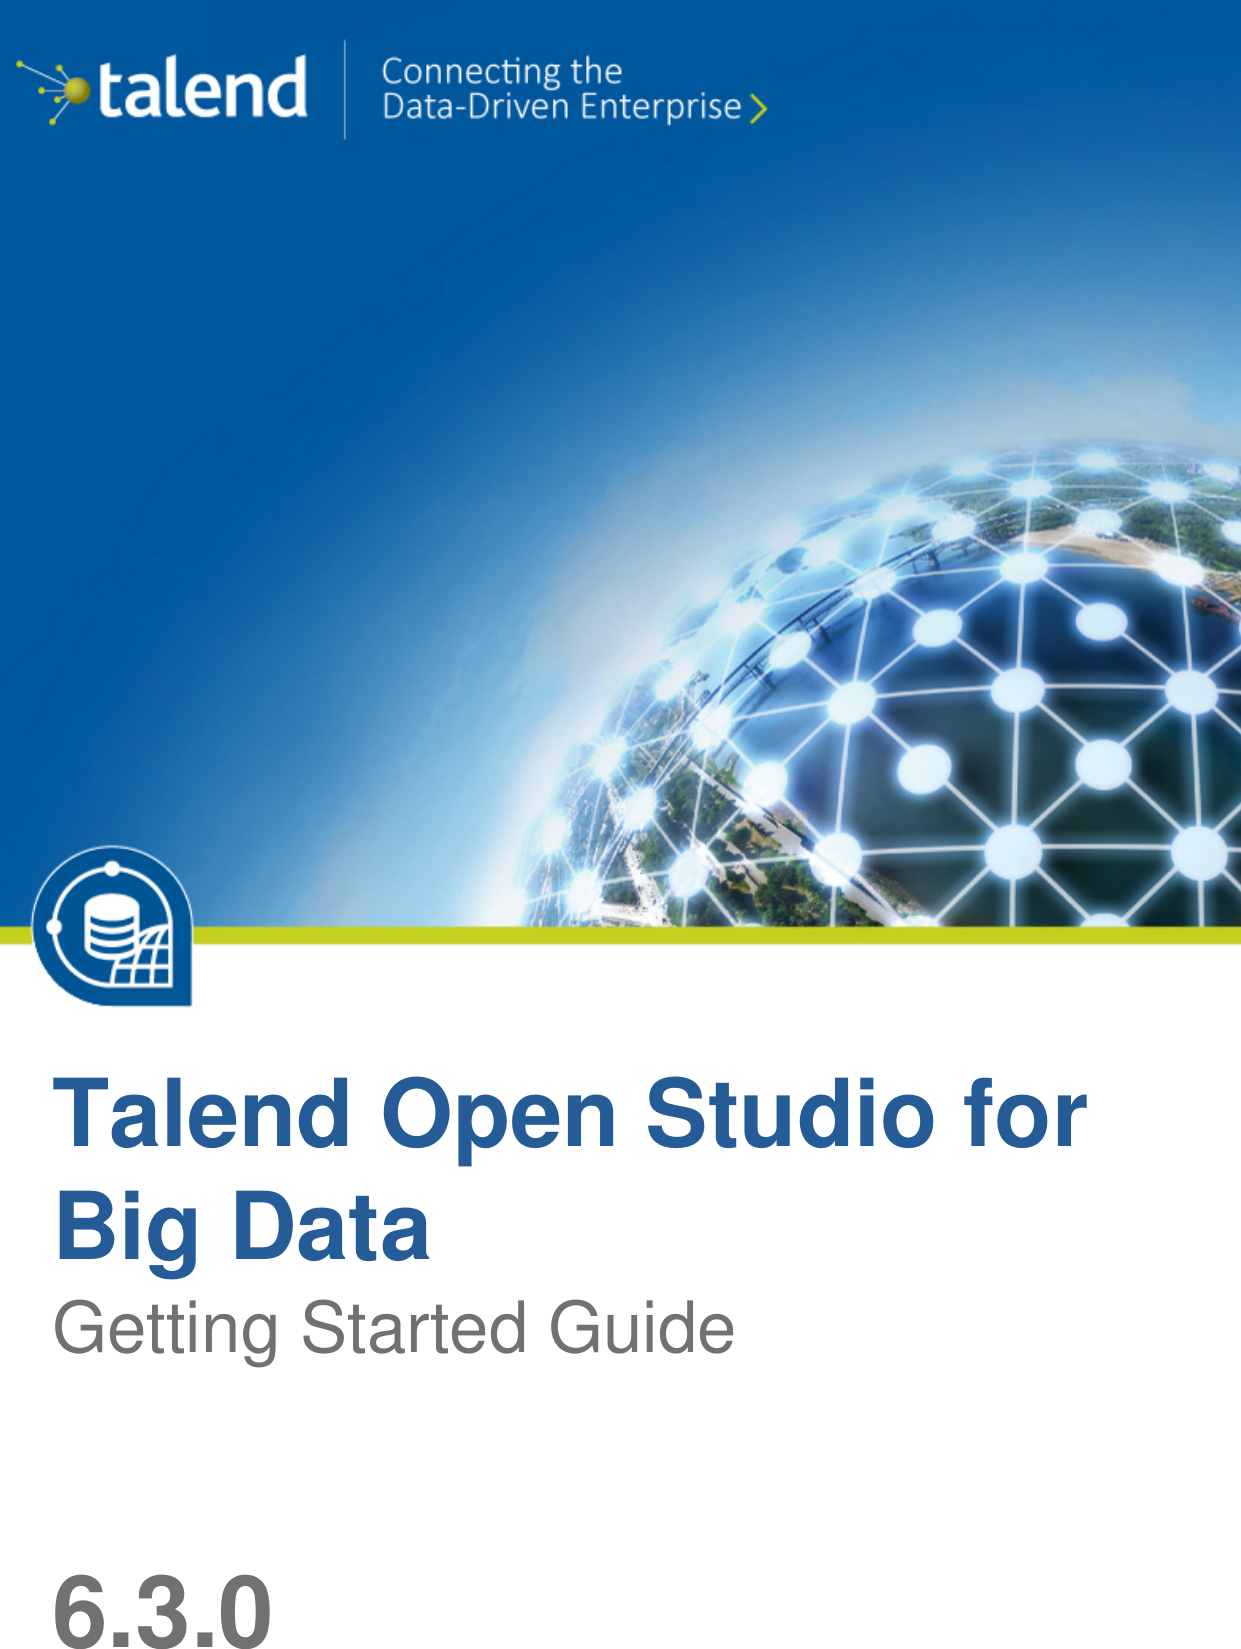 Talend Open Studio For Big Data Getting Started Guide